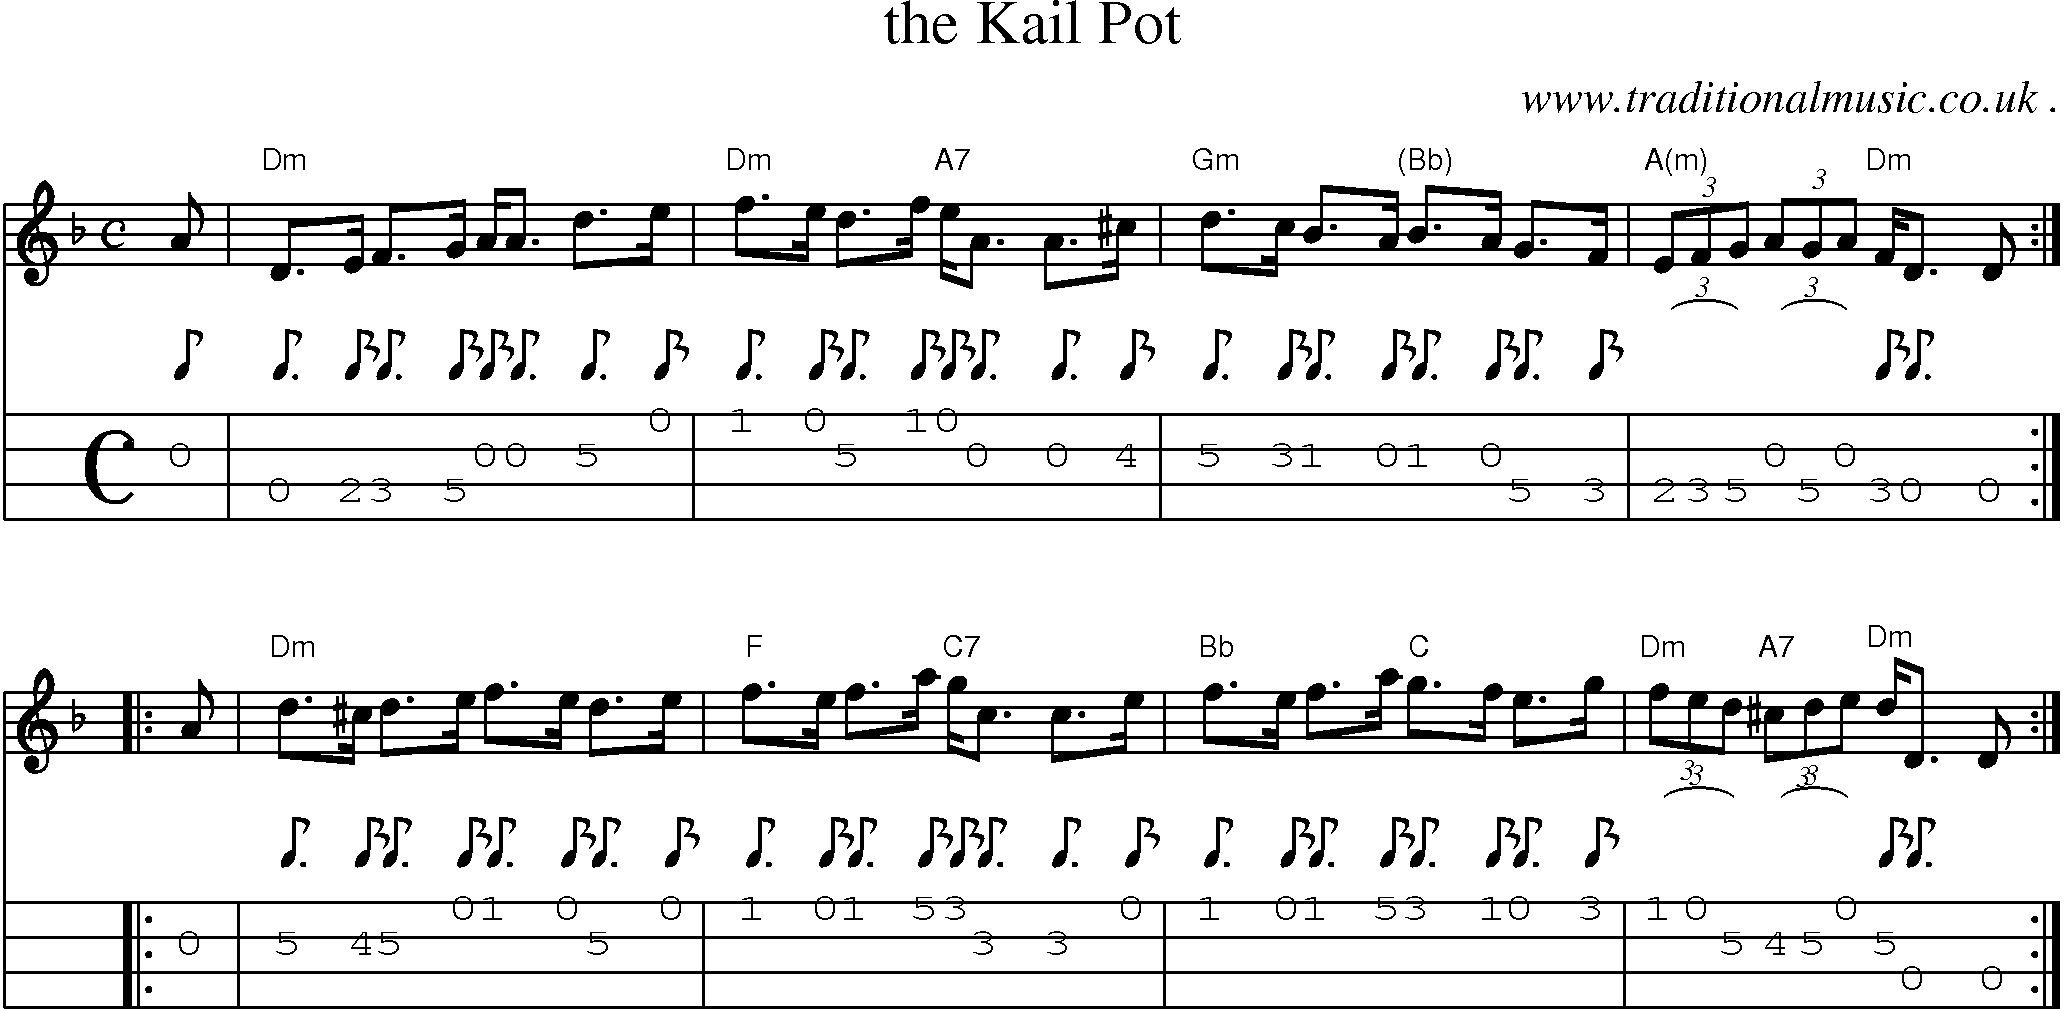 Sheet-music  score, Chords and Mandolin Tabs for The Kail Pot